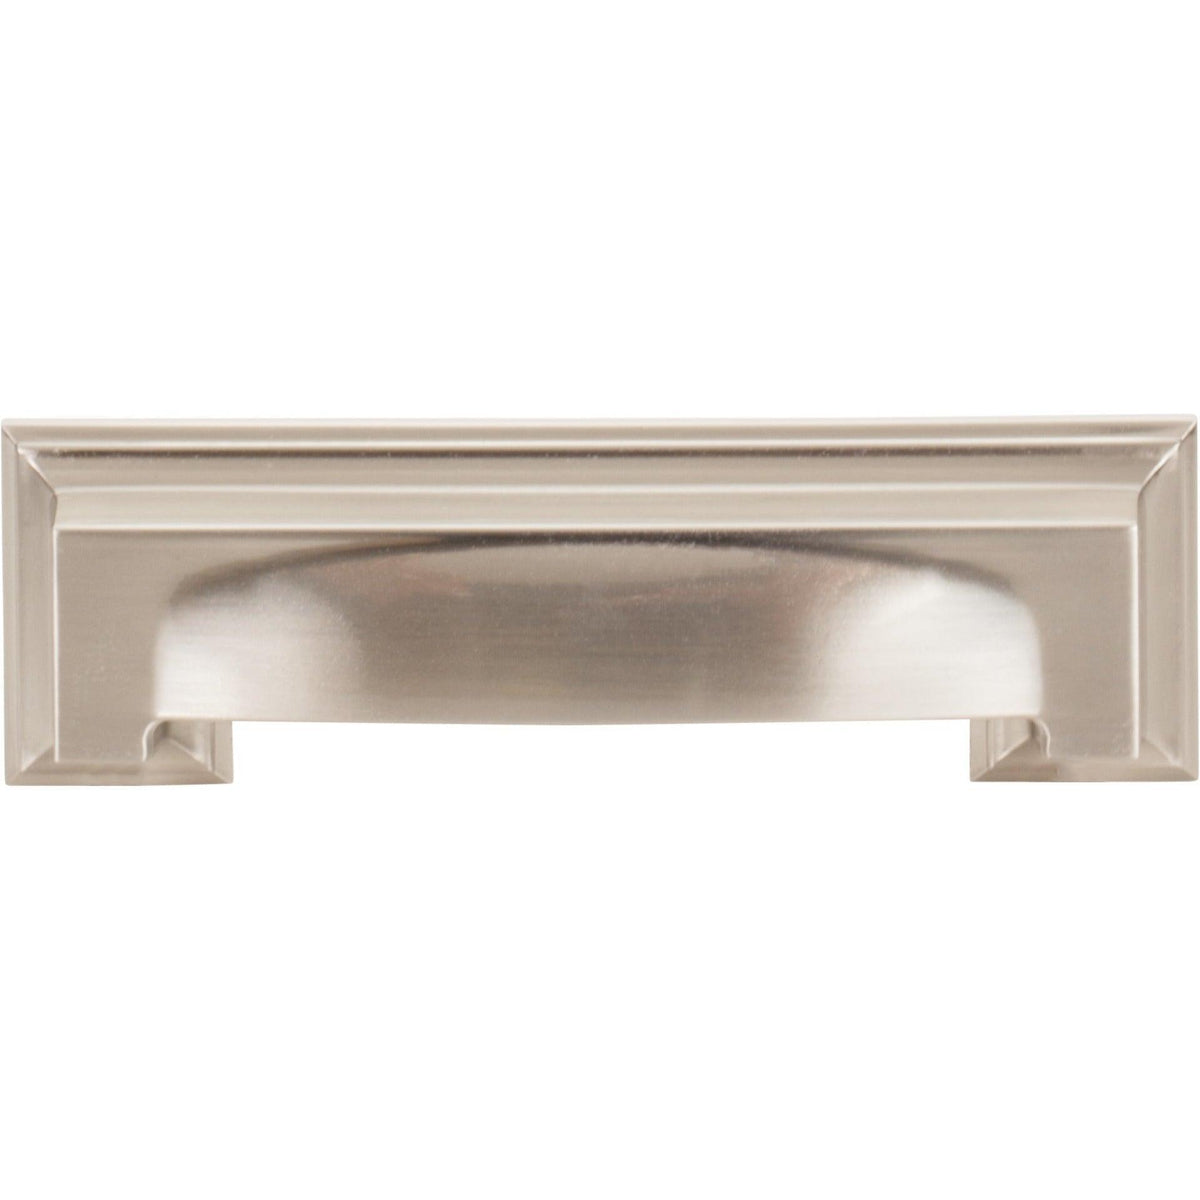 Atlas Homewares - Sutton Place Cup Pull - 339-BRN | Montreal Lighting & Hardware